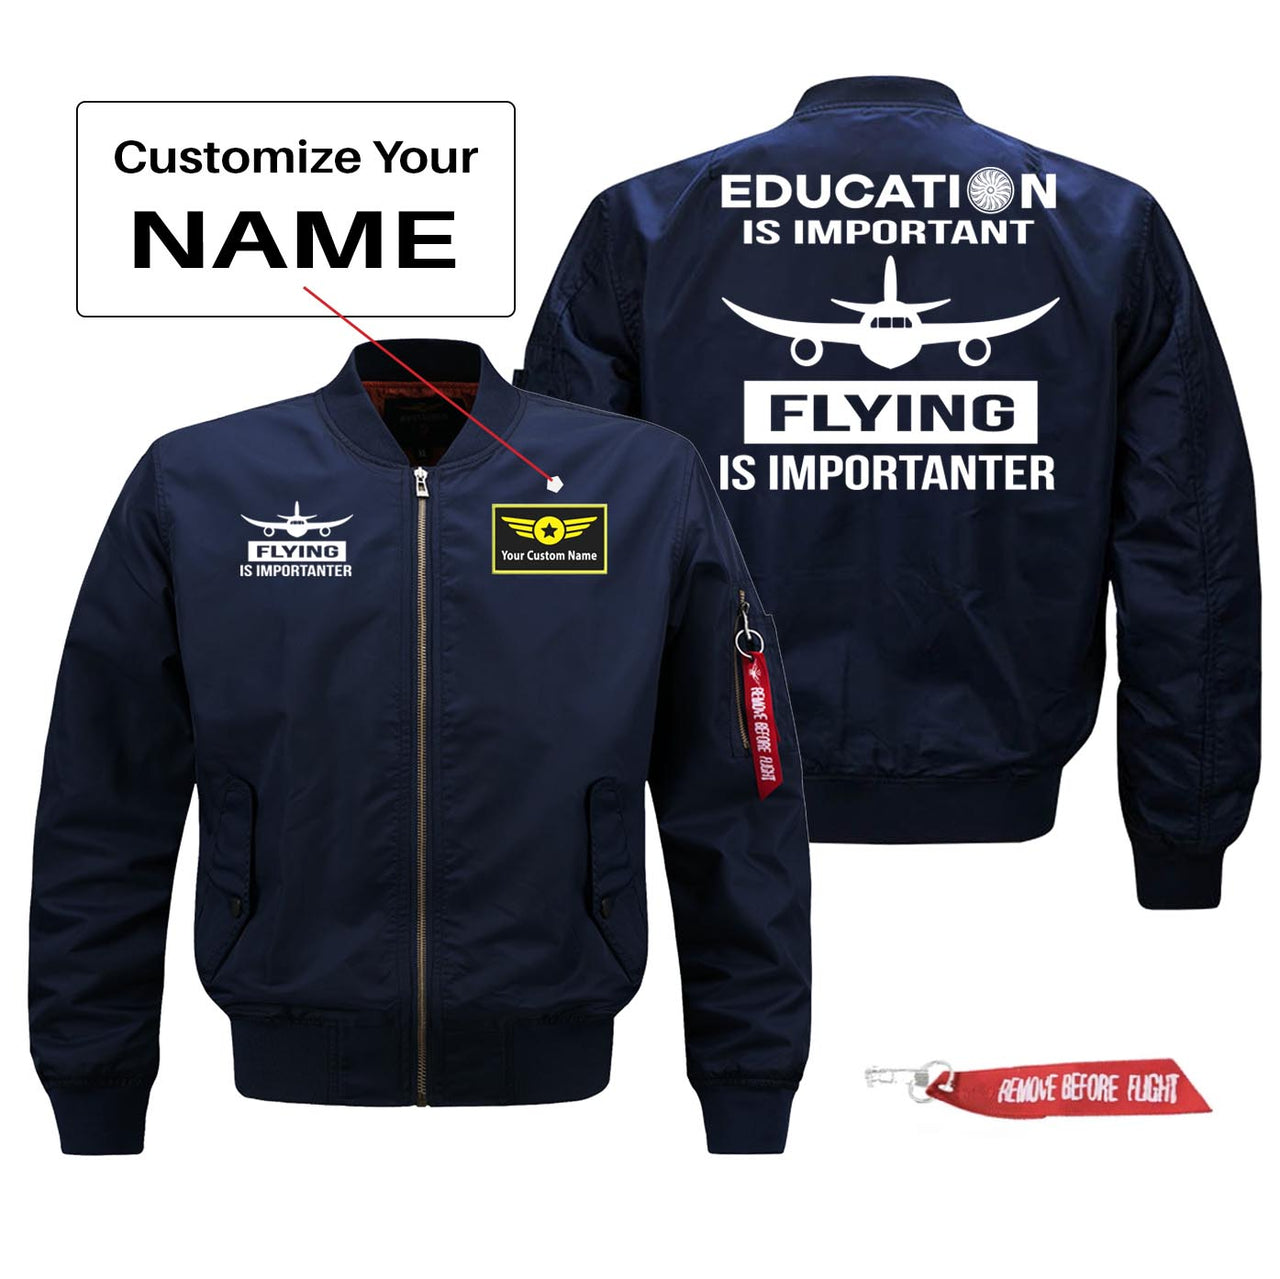 Education Is Important Flying is Importanter Designed Pilot Jackets (Customizable)